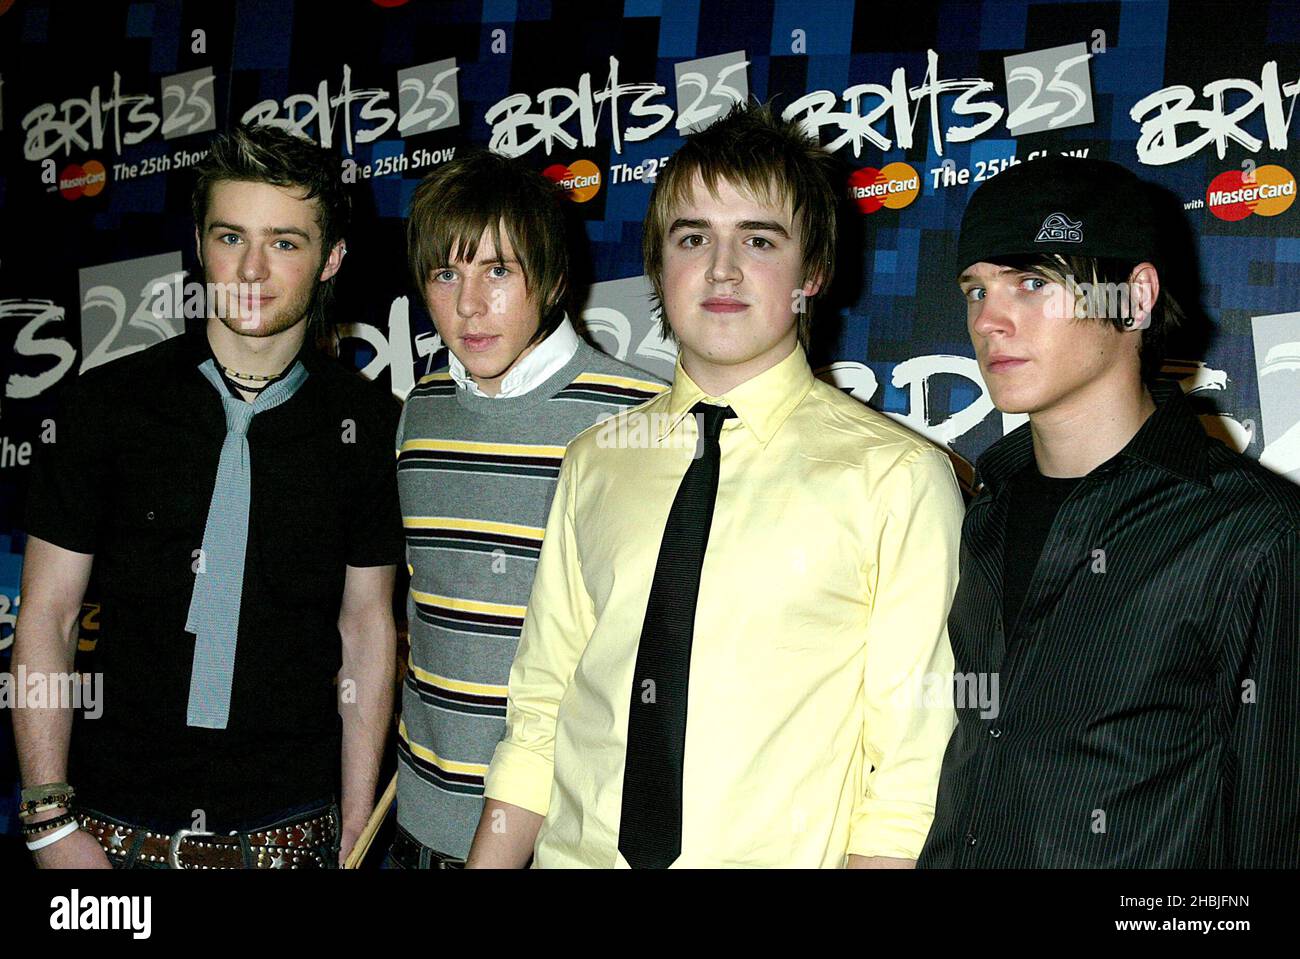 Danny Jones; Harry Judd; Tom Fletcher and Dougie Poynter of McFly attend the 'Brit Awards 2005 Shortlist Announcement' at the Park Lane Hotel on January 10, 2005 in London. Stock Photo